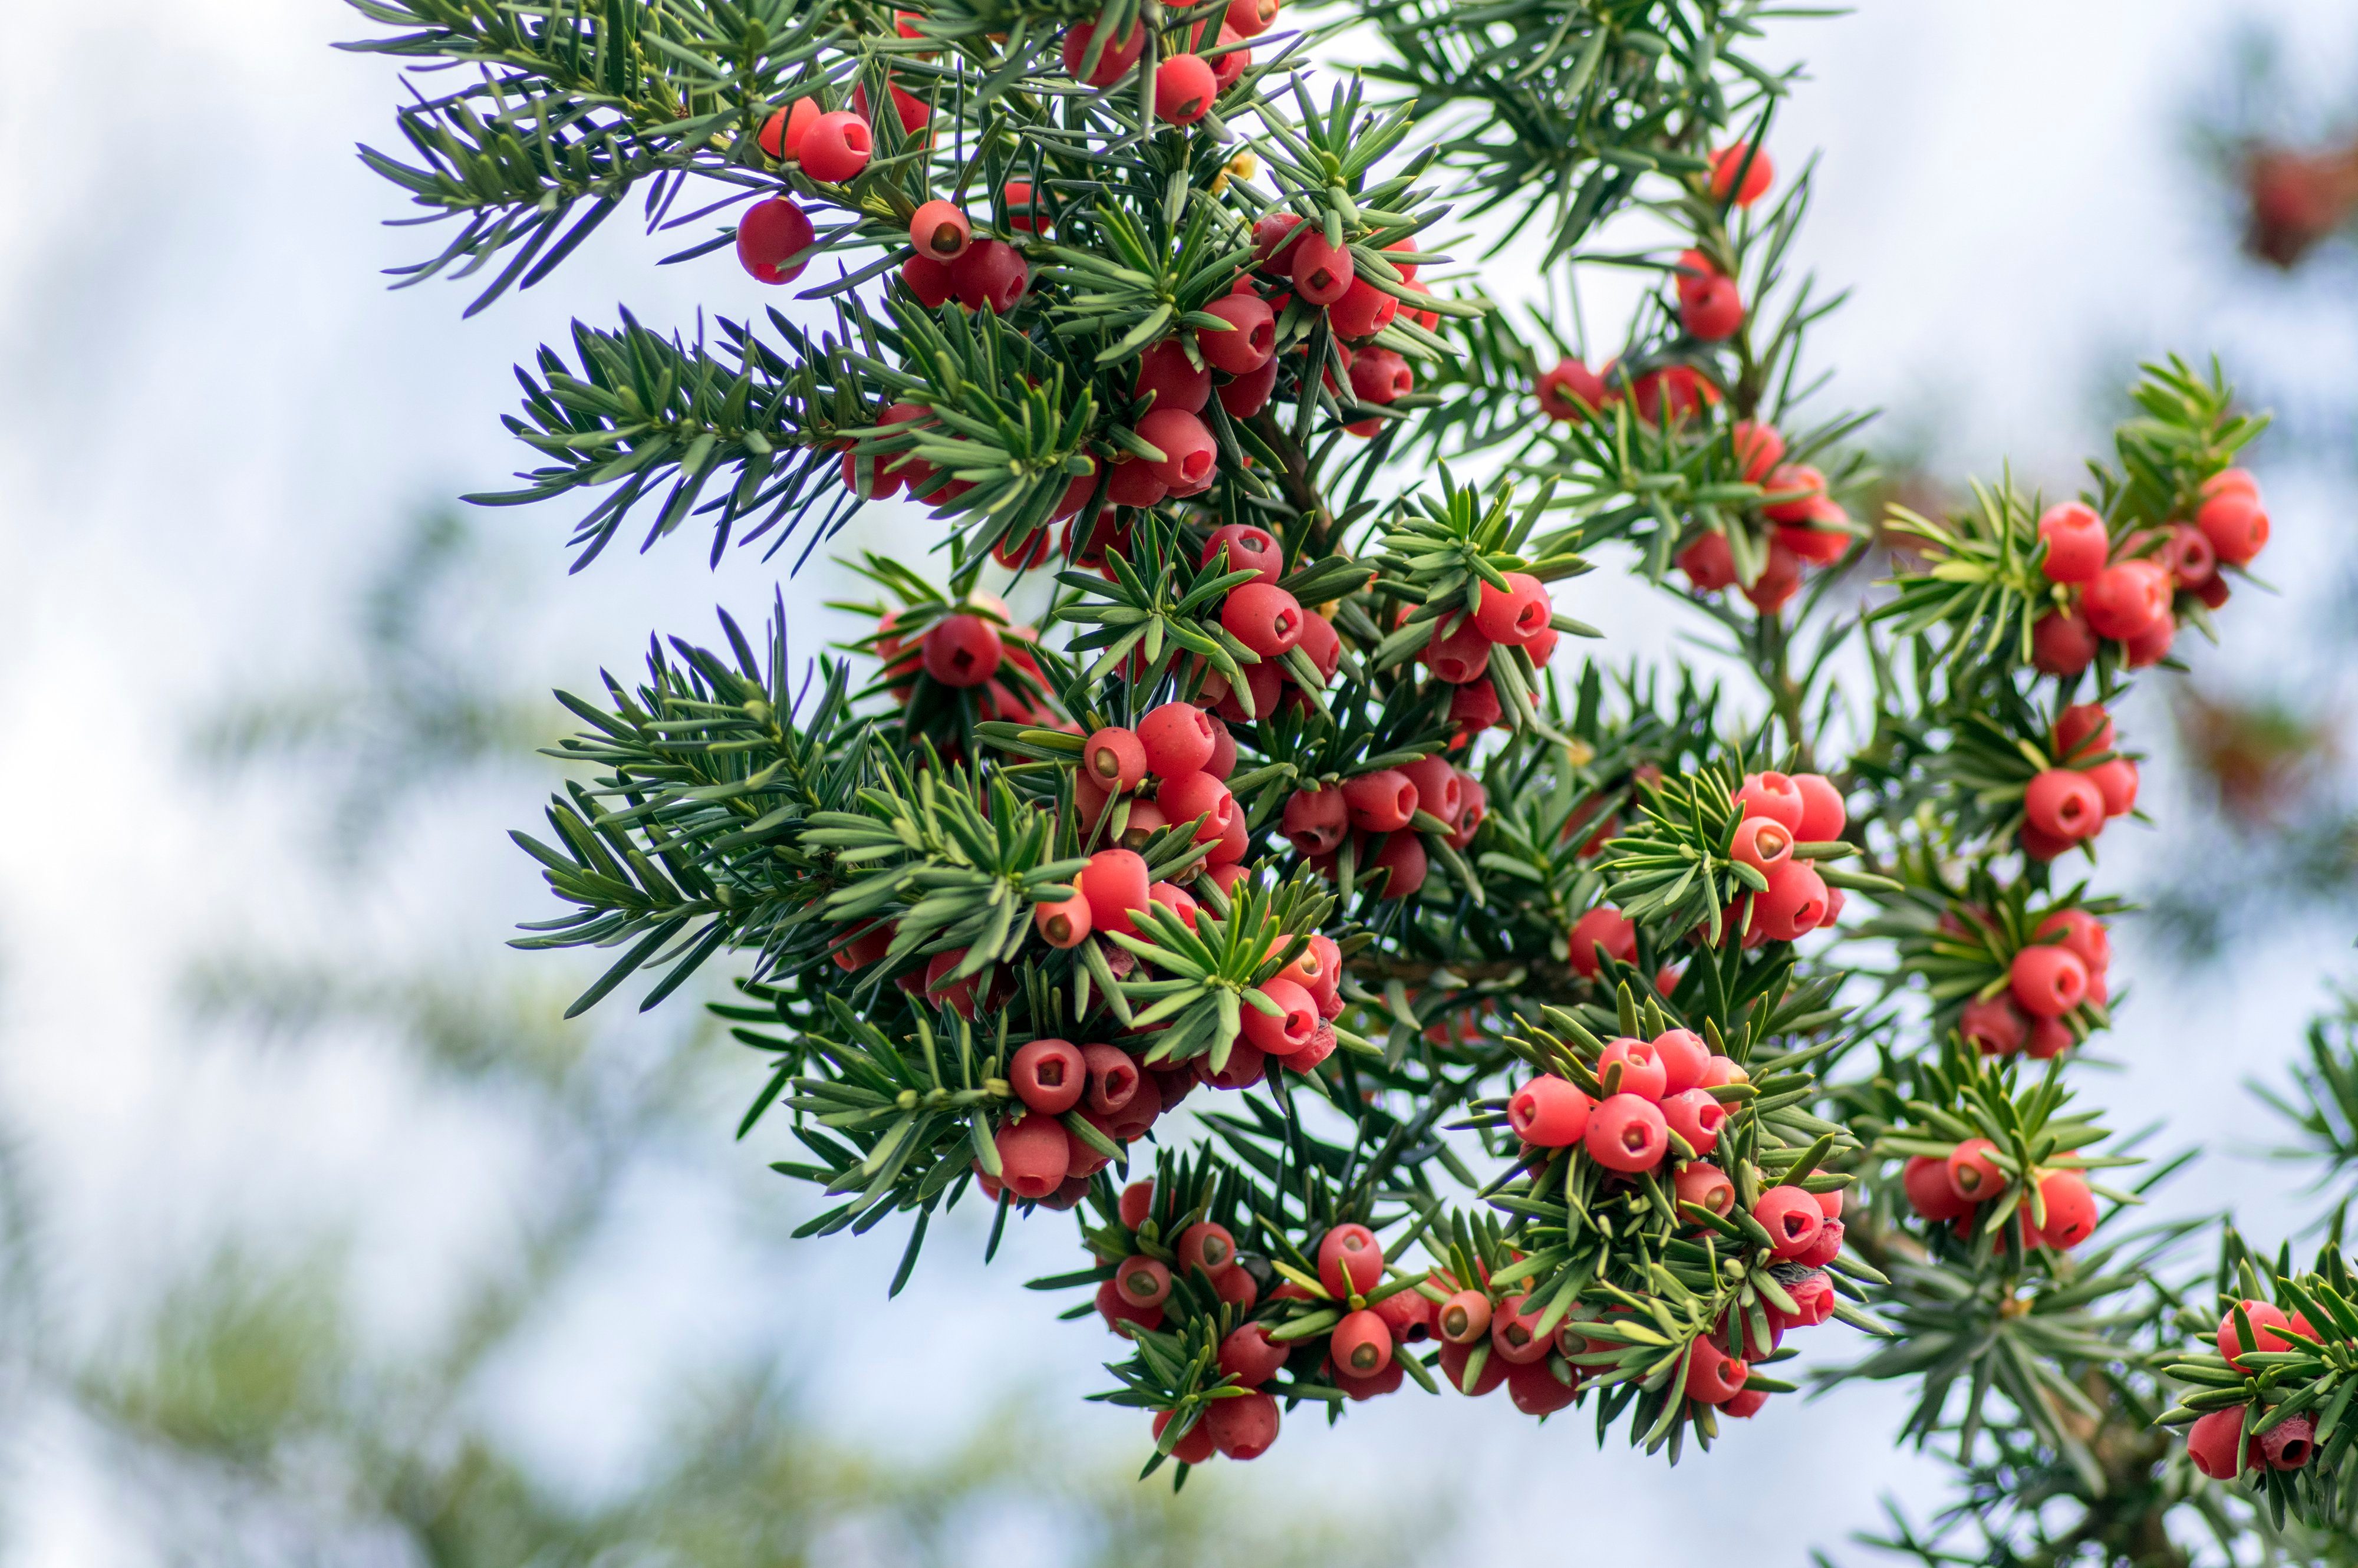 Taxus baccata European yew is conifer shrub with poisonous and bitter red ripened berry fruits on branches, light blue sky